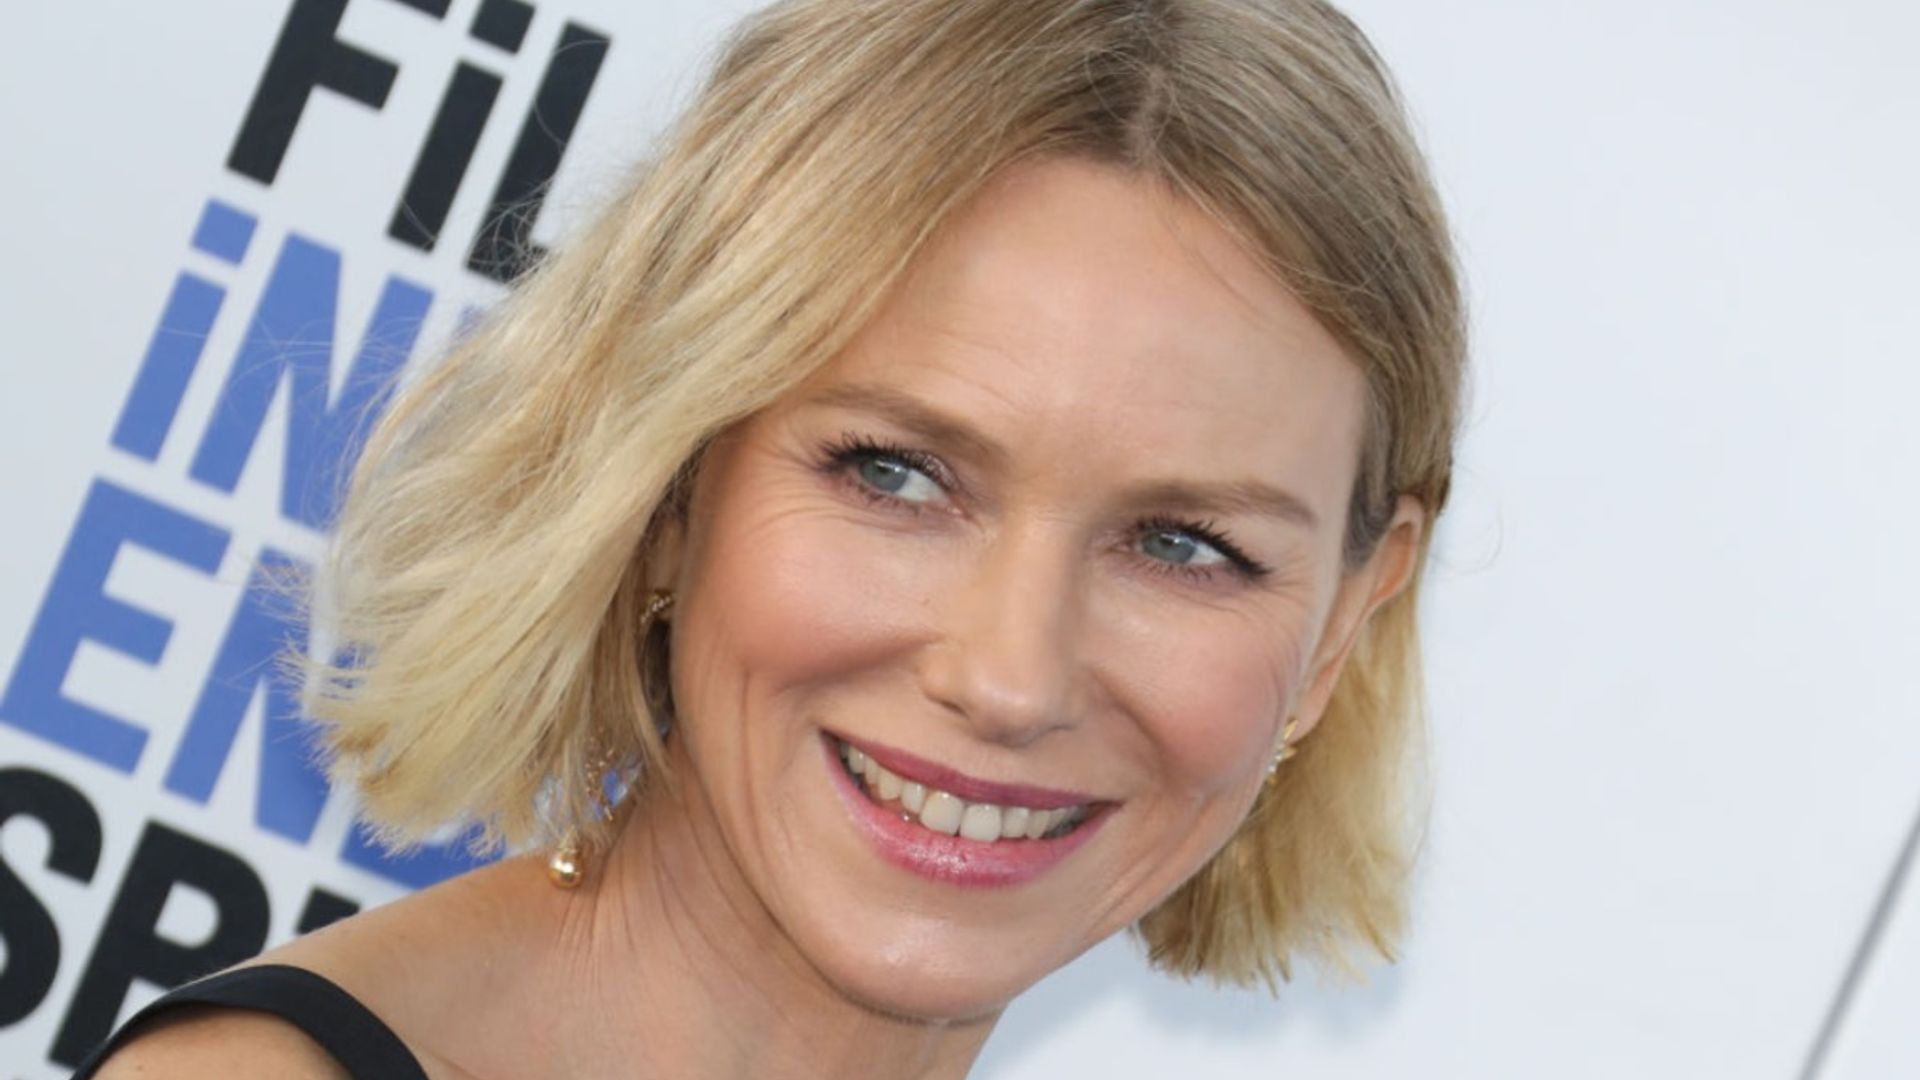 Naomi Watts is unrecognisable after shocking lockdown makeover.